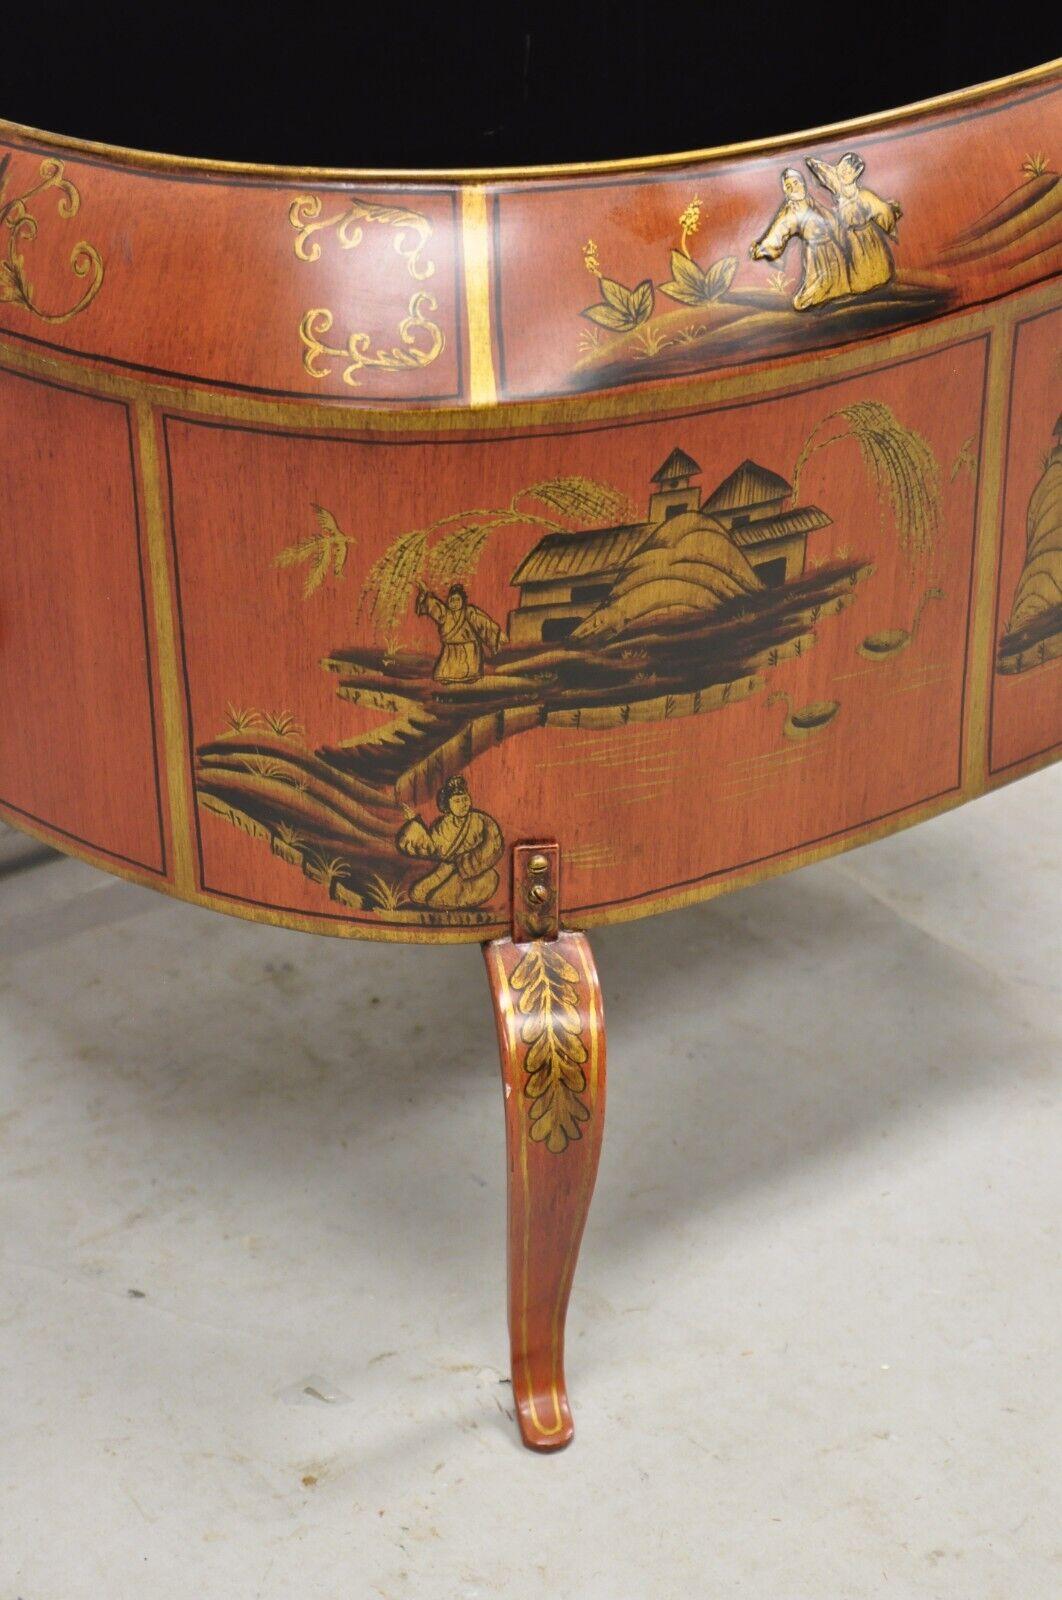 Contemporary Italian Red Tole Chinoiserie Gilt Decorated Floor Jardiniere Planter For Sale